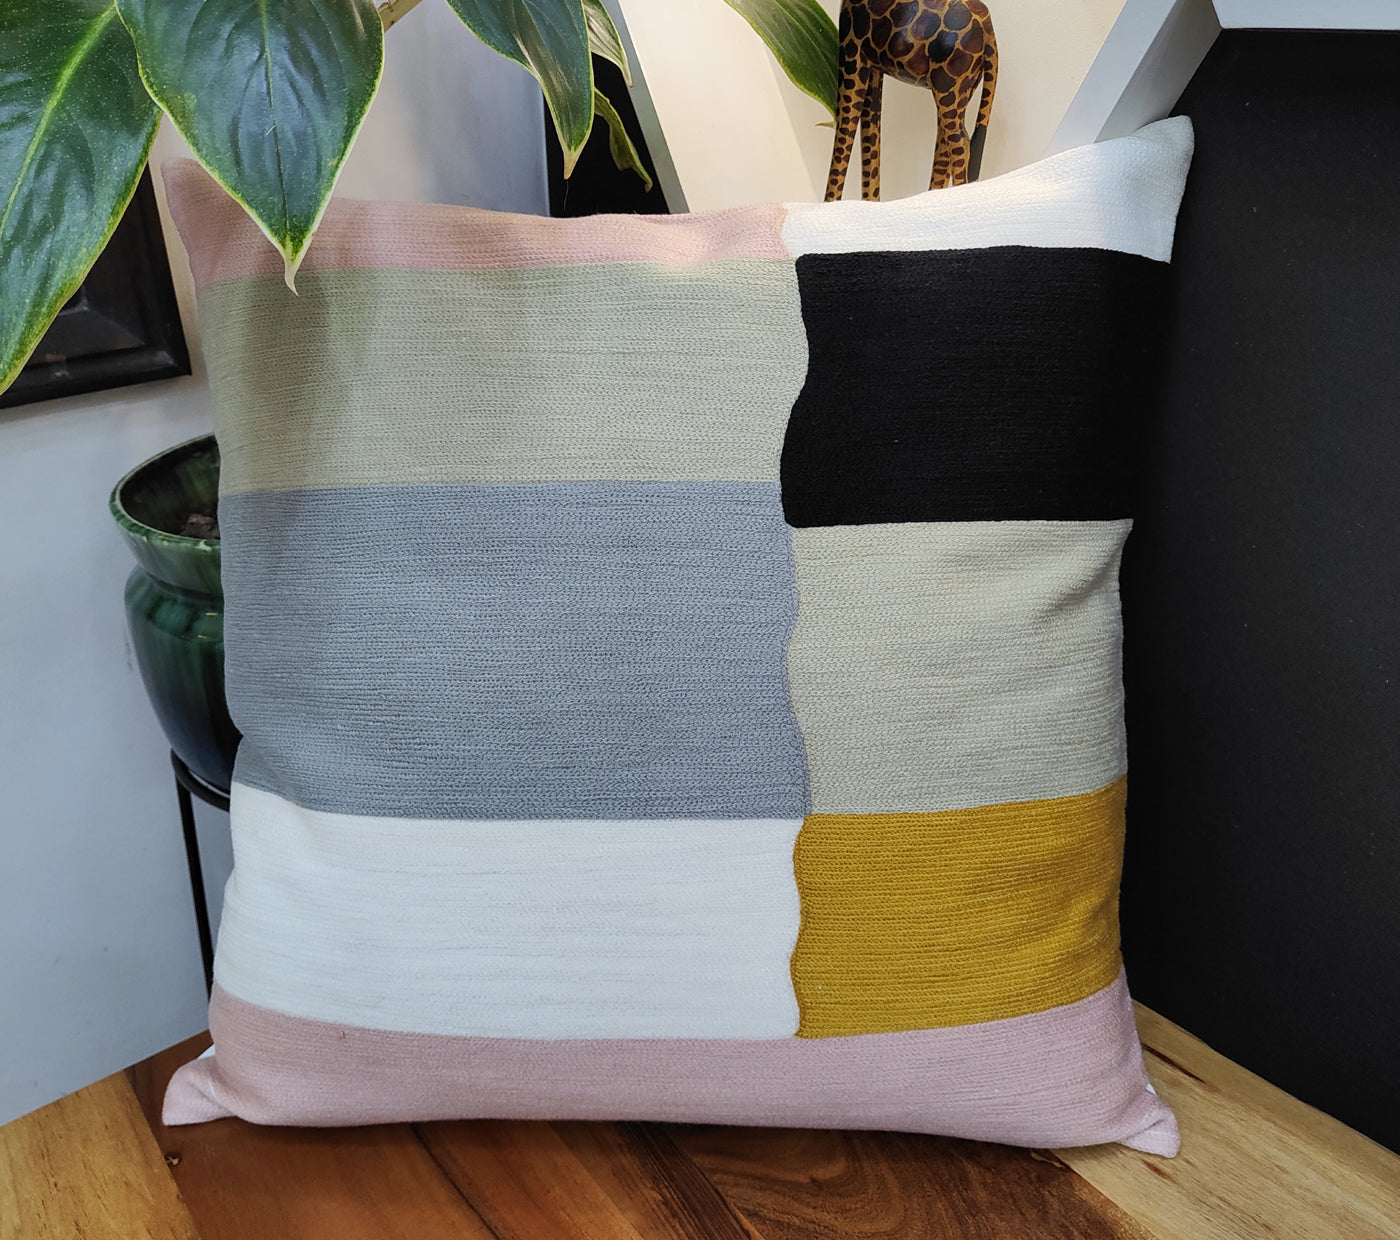 Geometrical Blocks  Embroidered Cushion Cover Size 50X50Cms